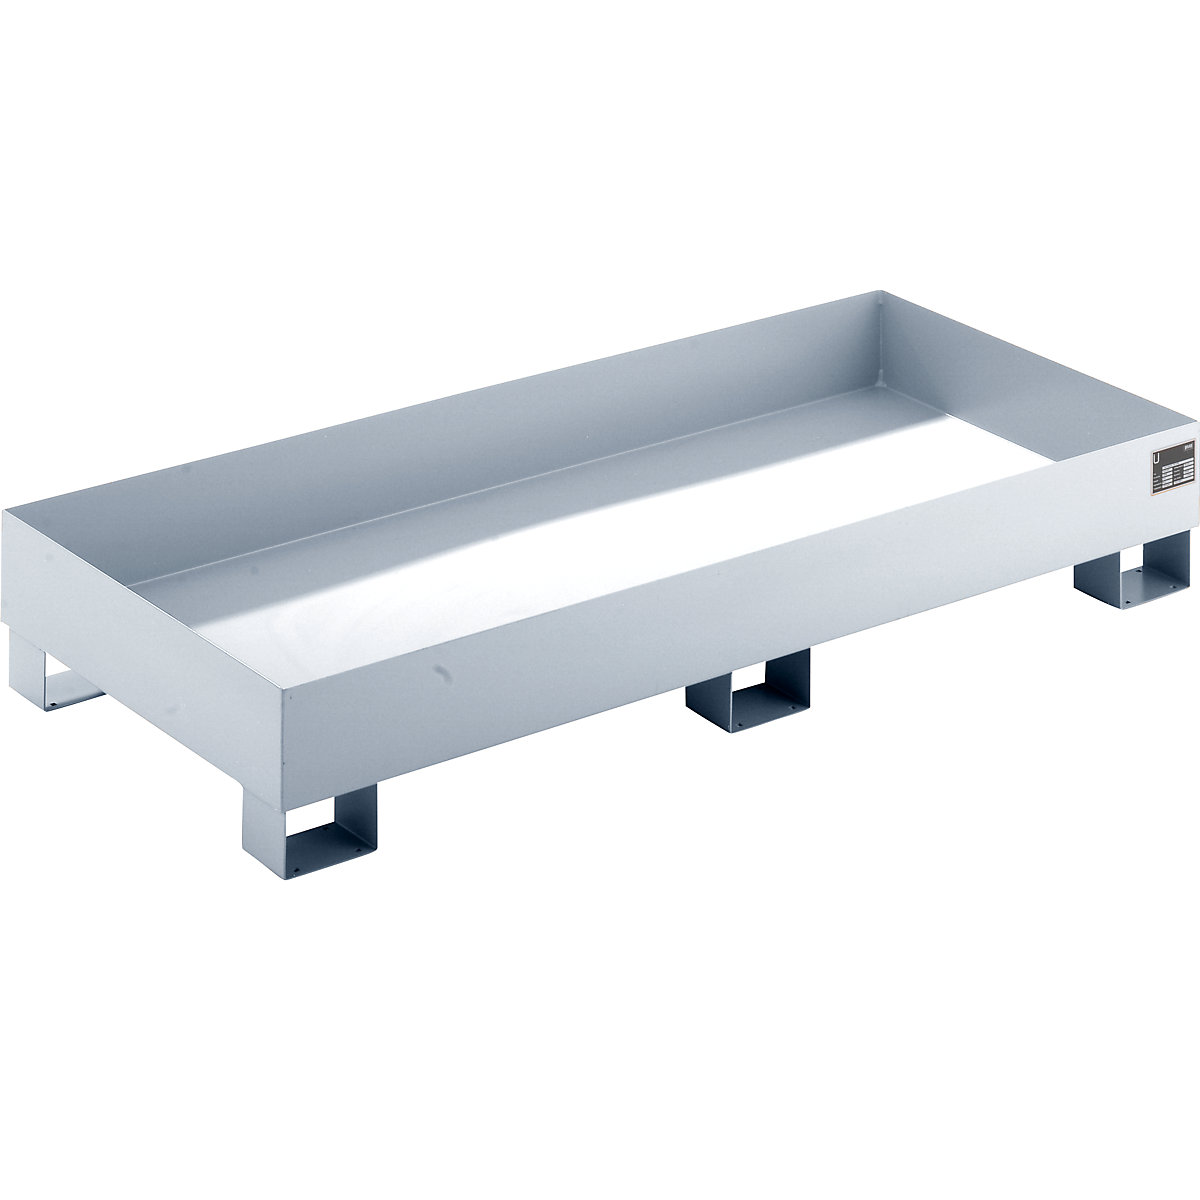 EUROKRAFTbasic – Sump tray made from sheet steel, LxWxH 1800 x 800 x 275 mm, hot dip galvanised